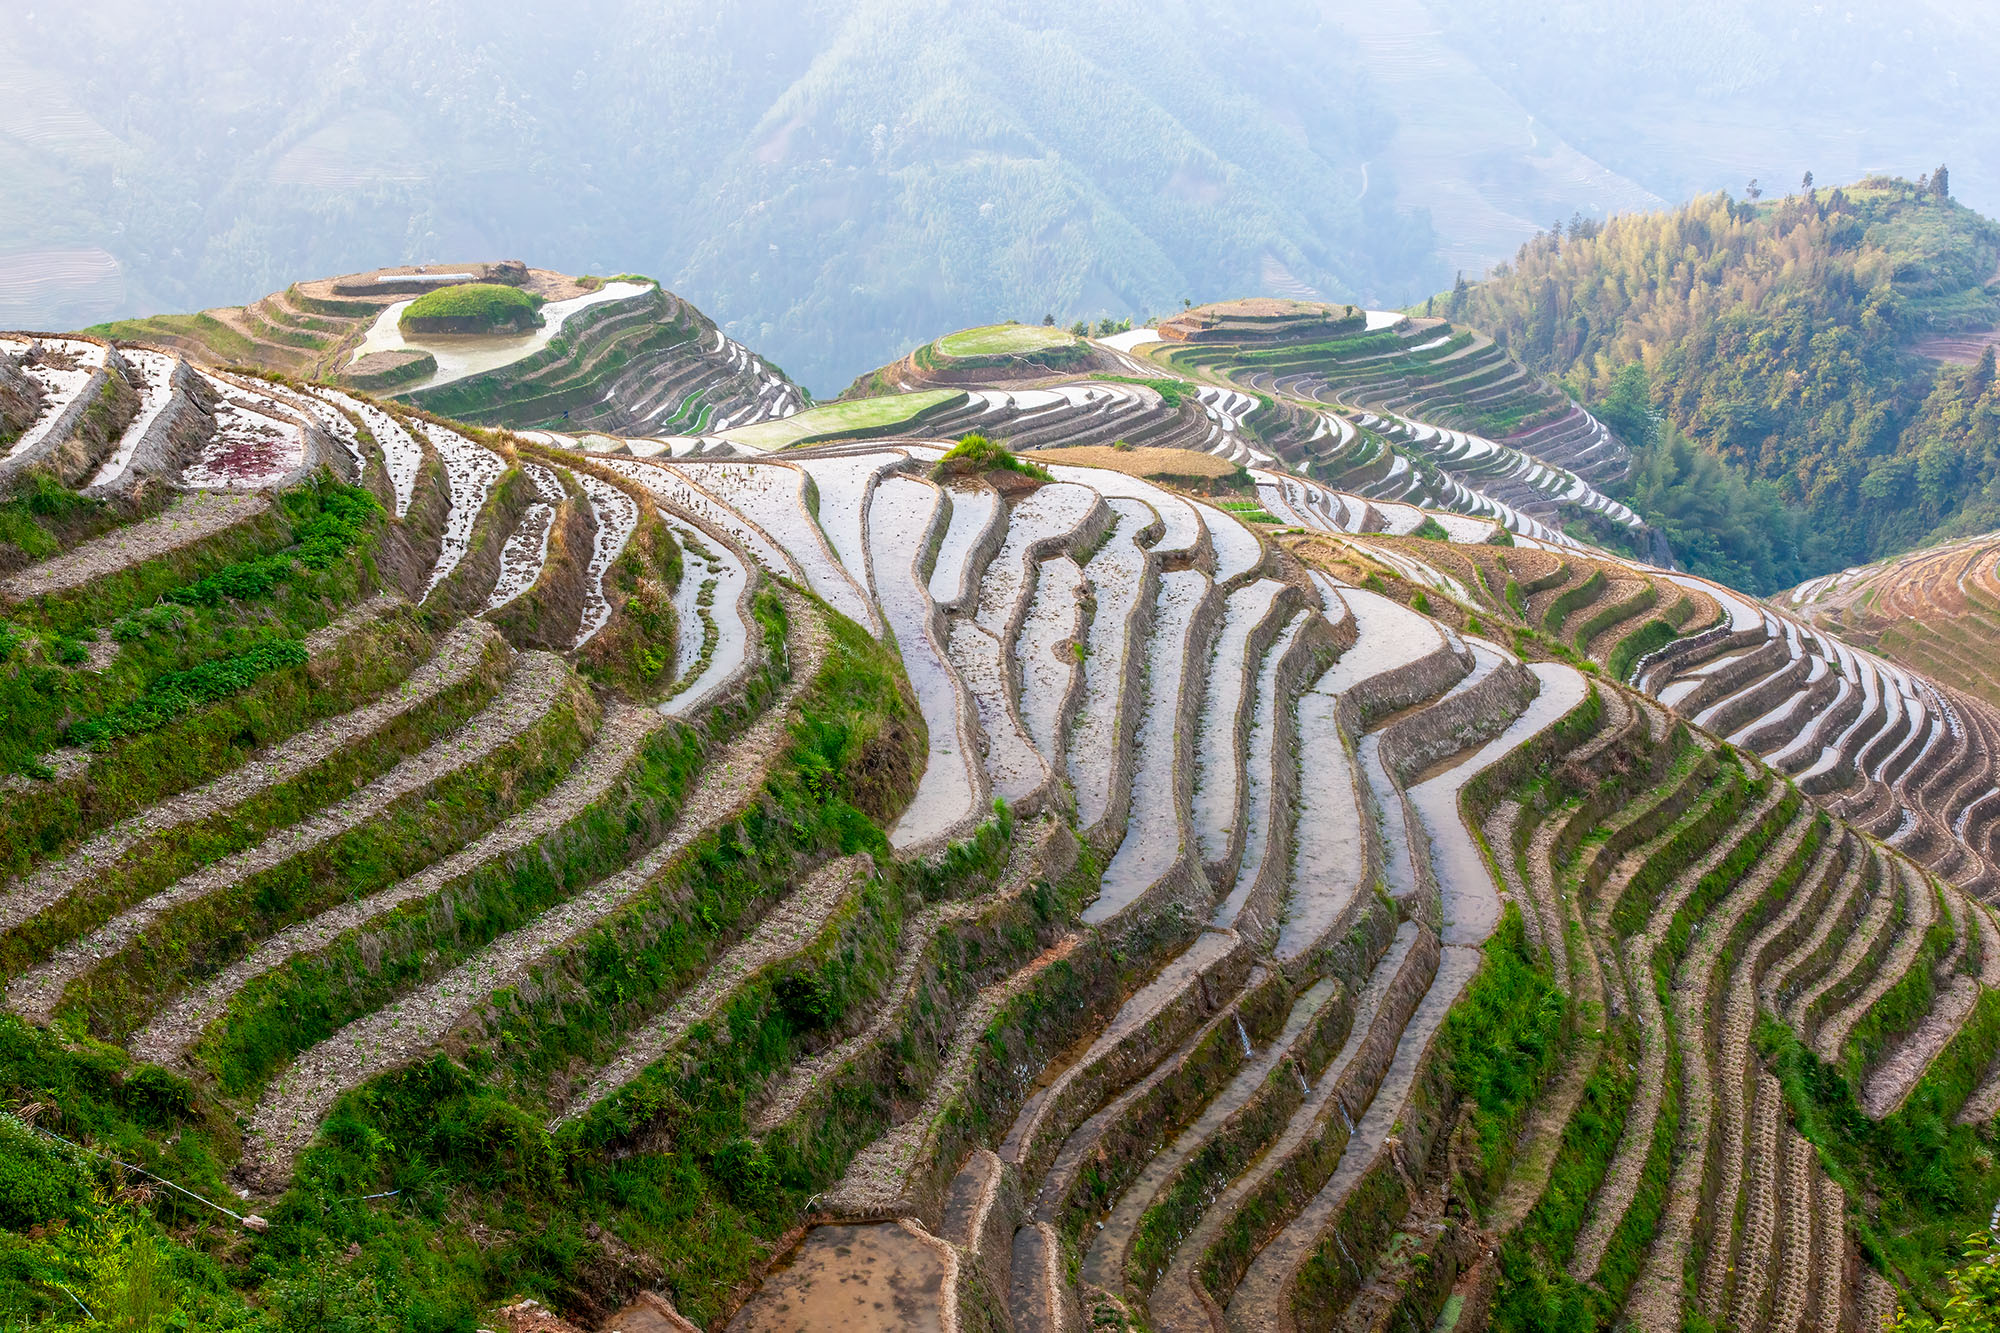 This photograph was taken in the Longji Rice Terraces, Ping’an, Guangxi, China. It shows a massive flooded set of rice terraces...